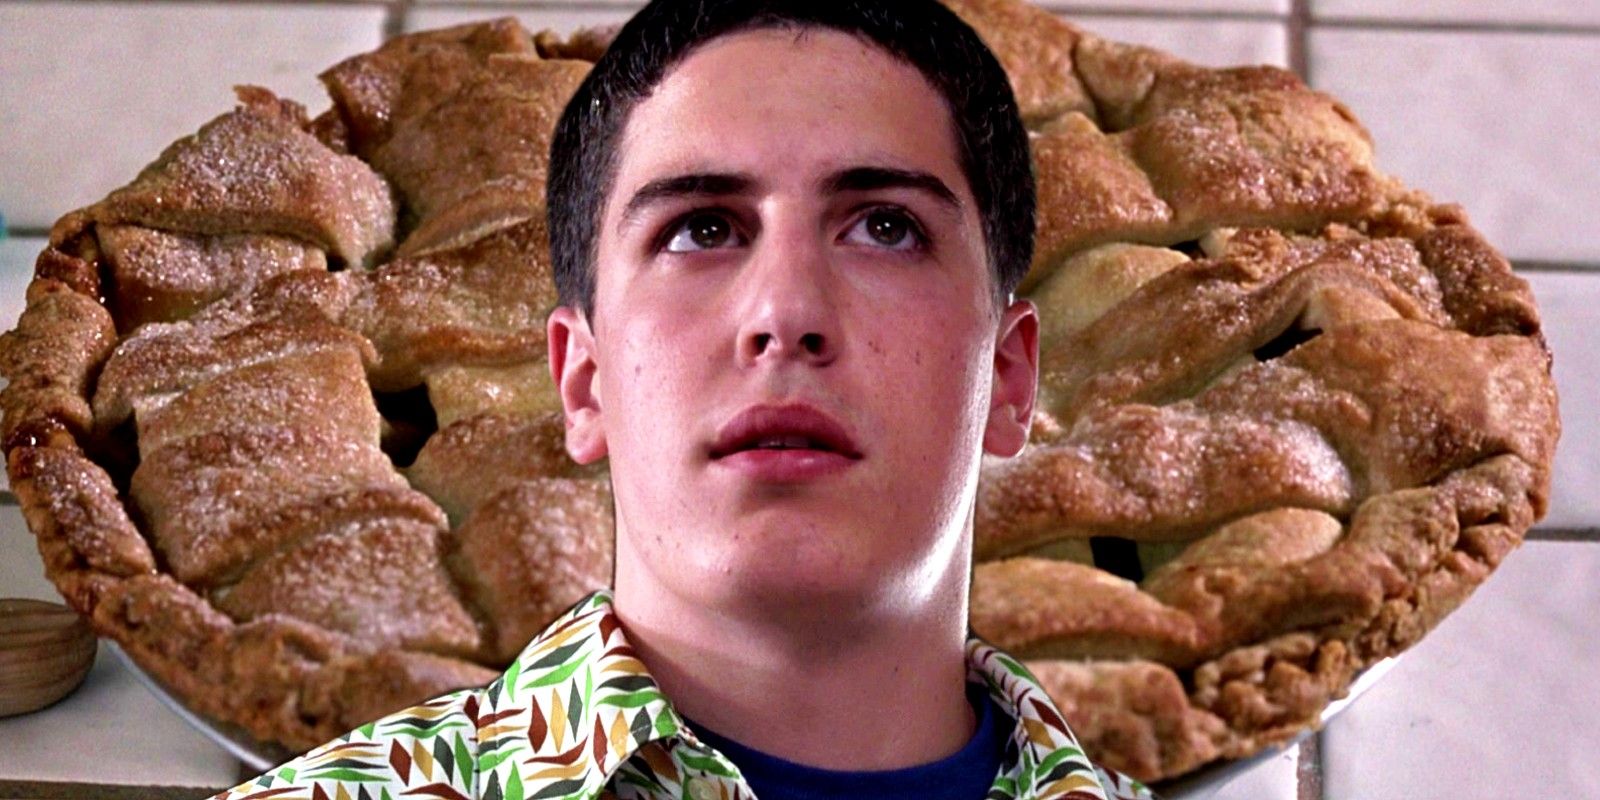 Jason Biggs in the movie American Pie with the infamous apple pie behind him